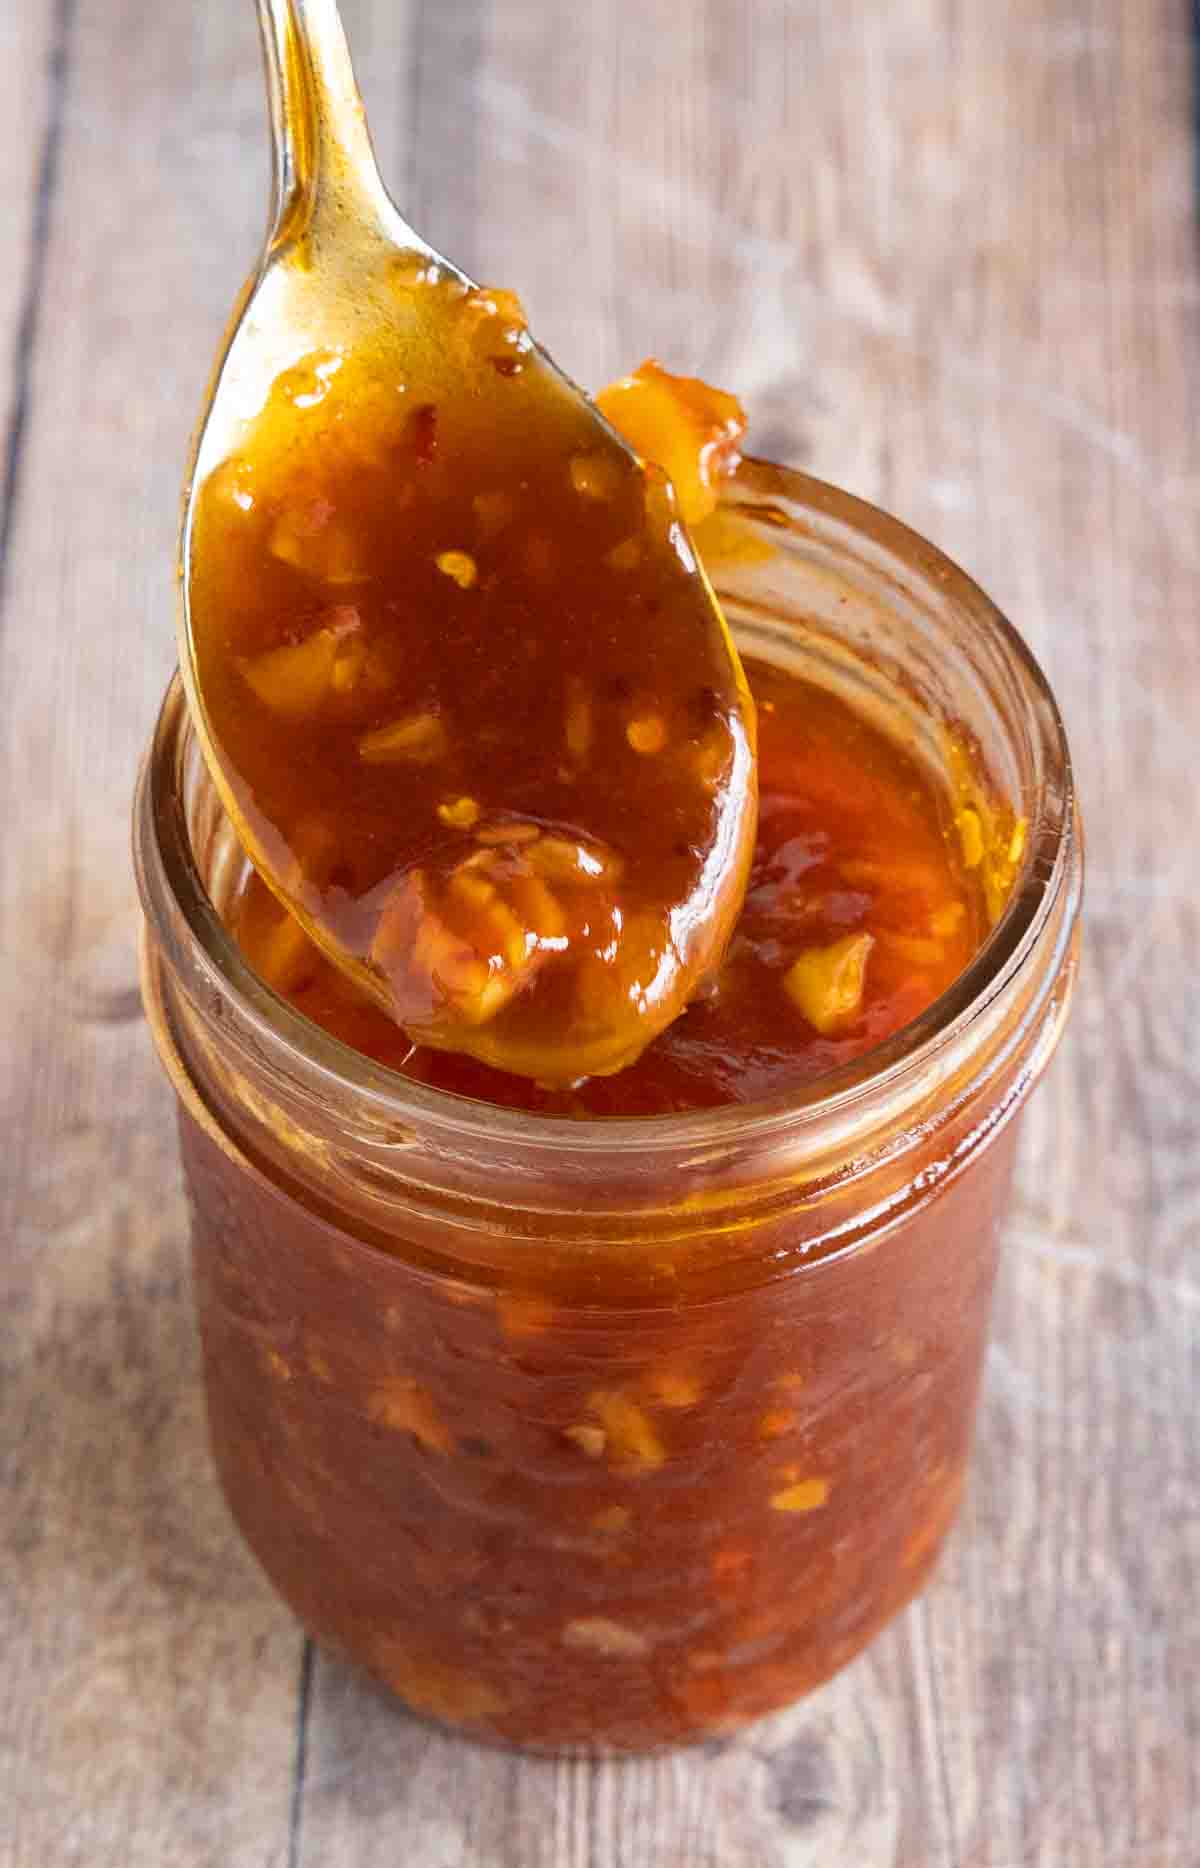 Honey sriracha sauce in a glass jar with a spoon coming out.